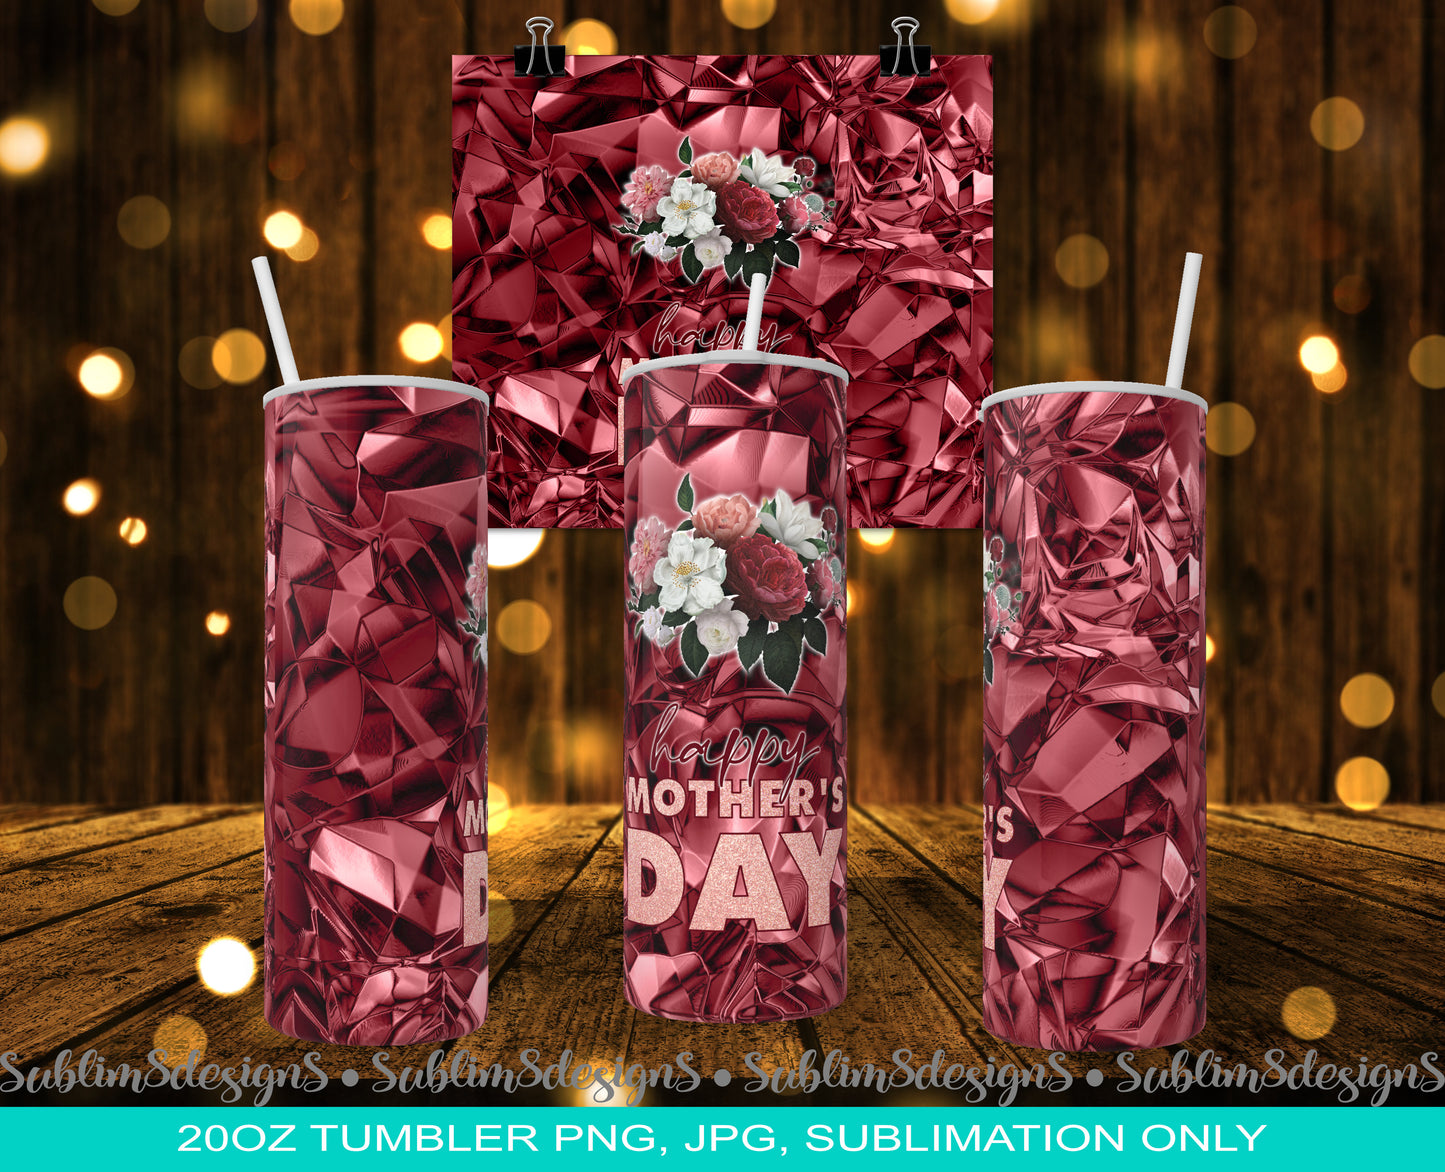 Happy Mother's Day 20oz Tumbler PNG and JPG ONLY